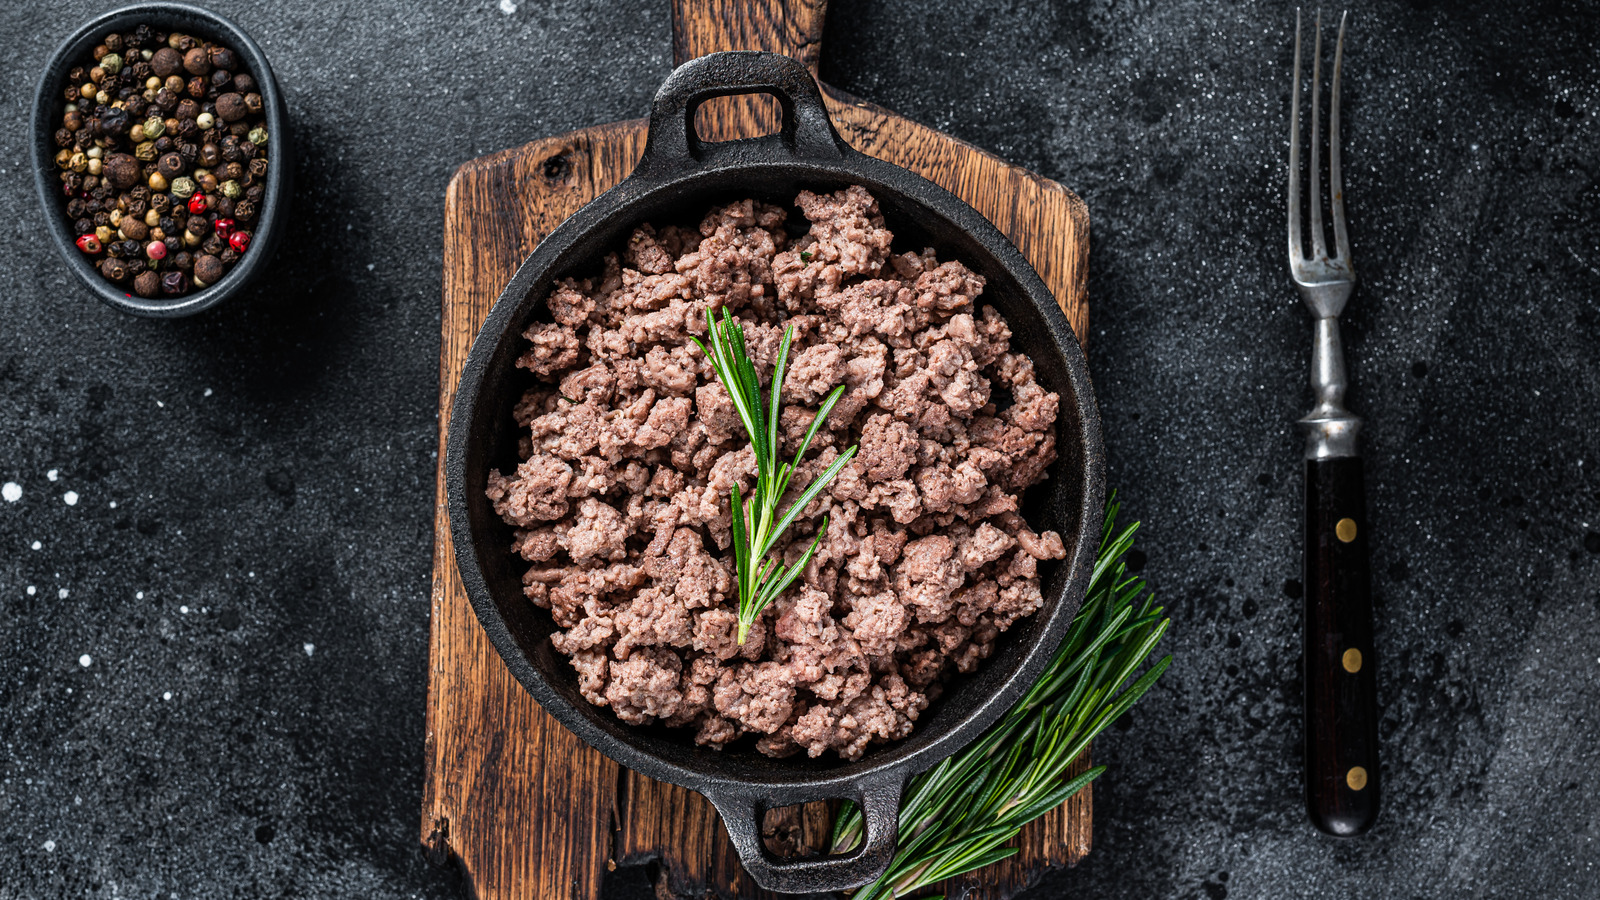 Tips You Need When Cooking With Ground Beef